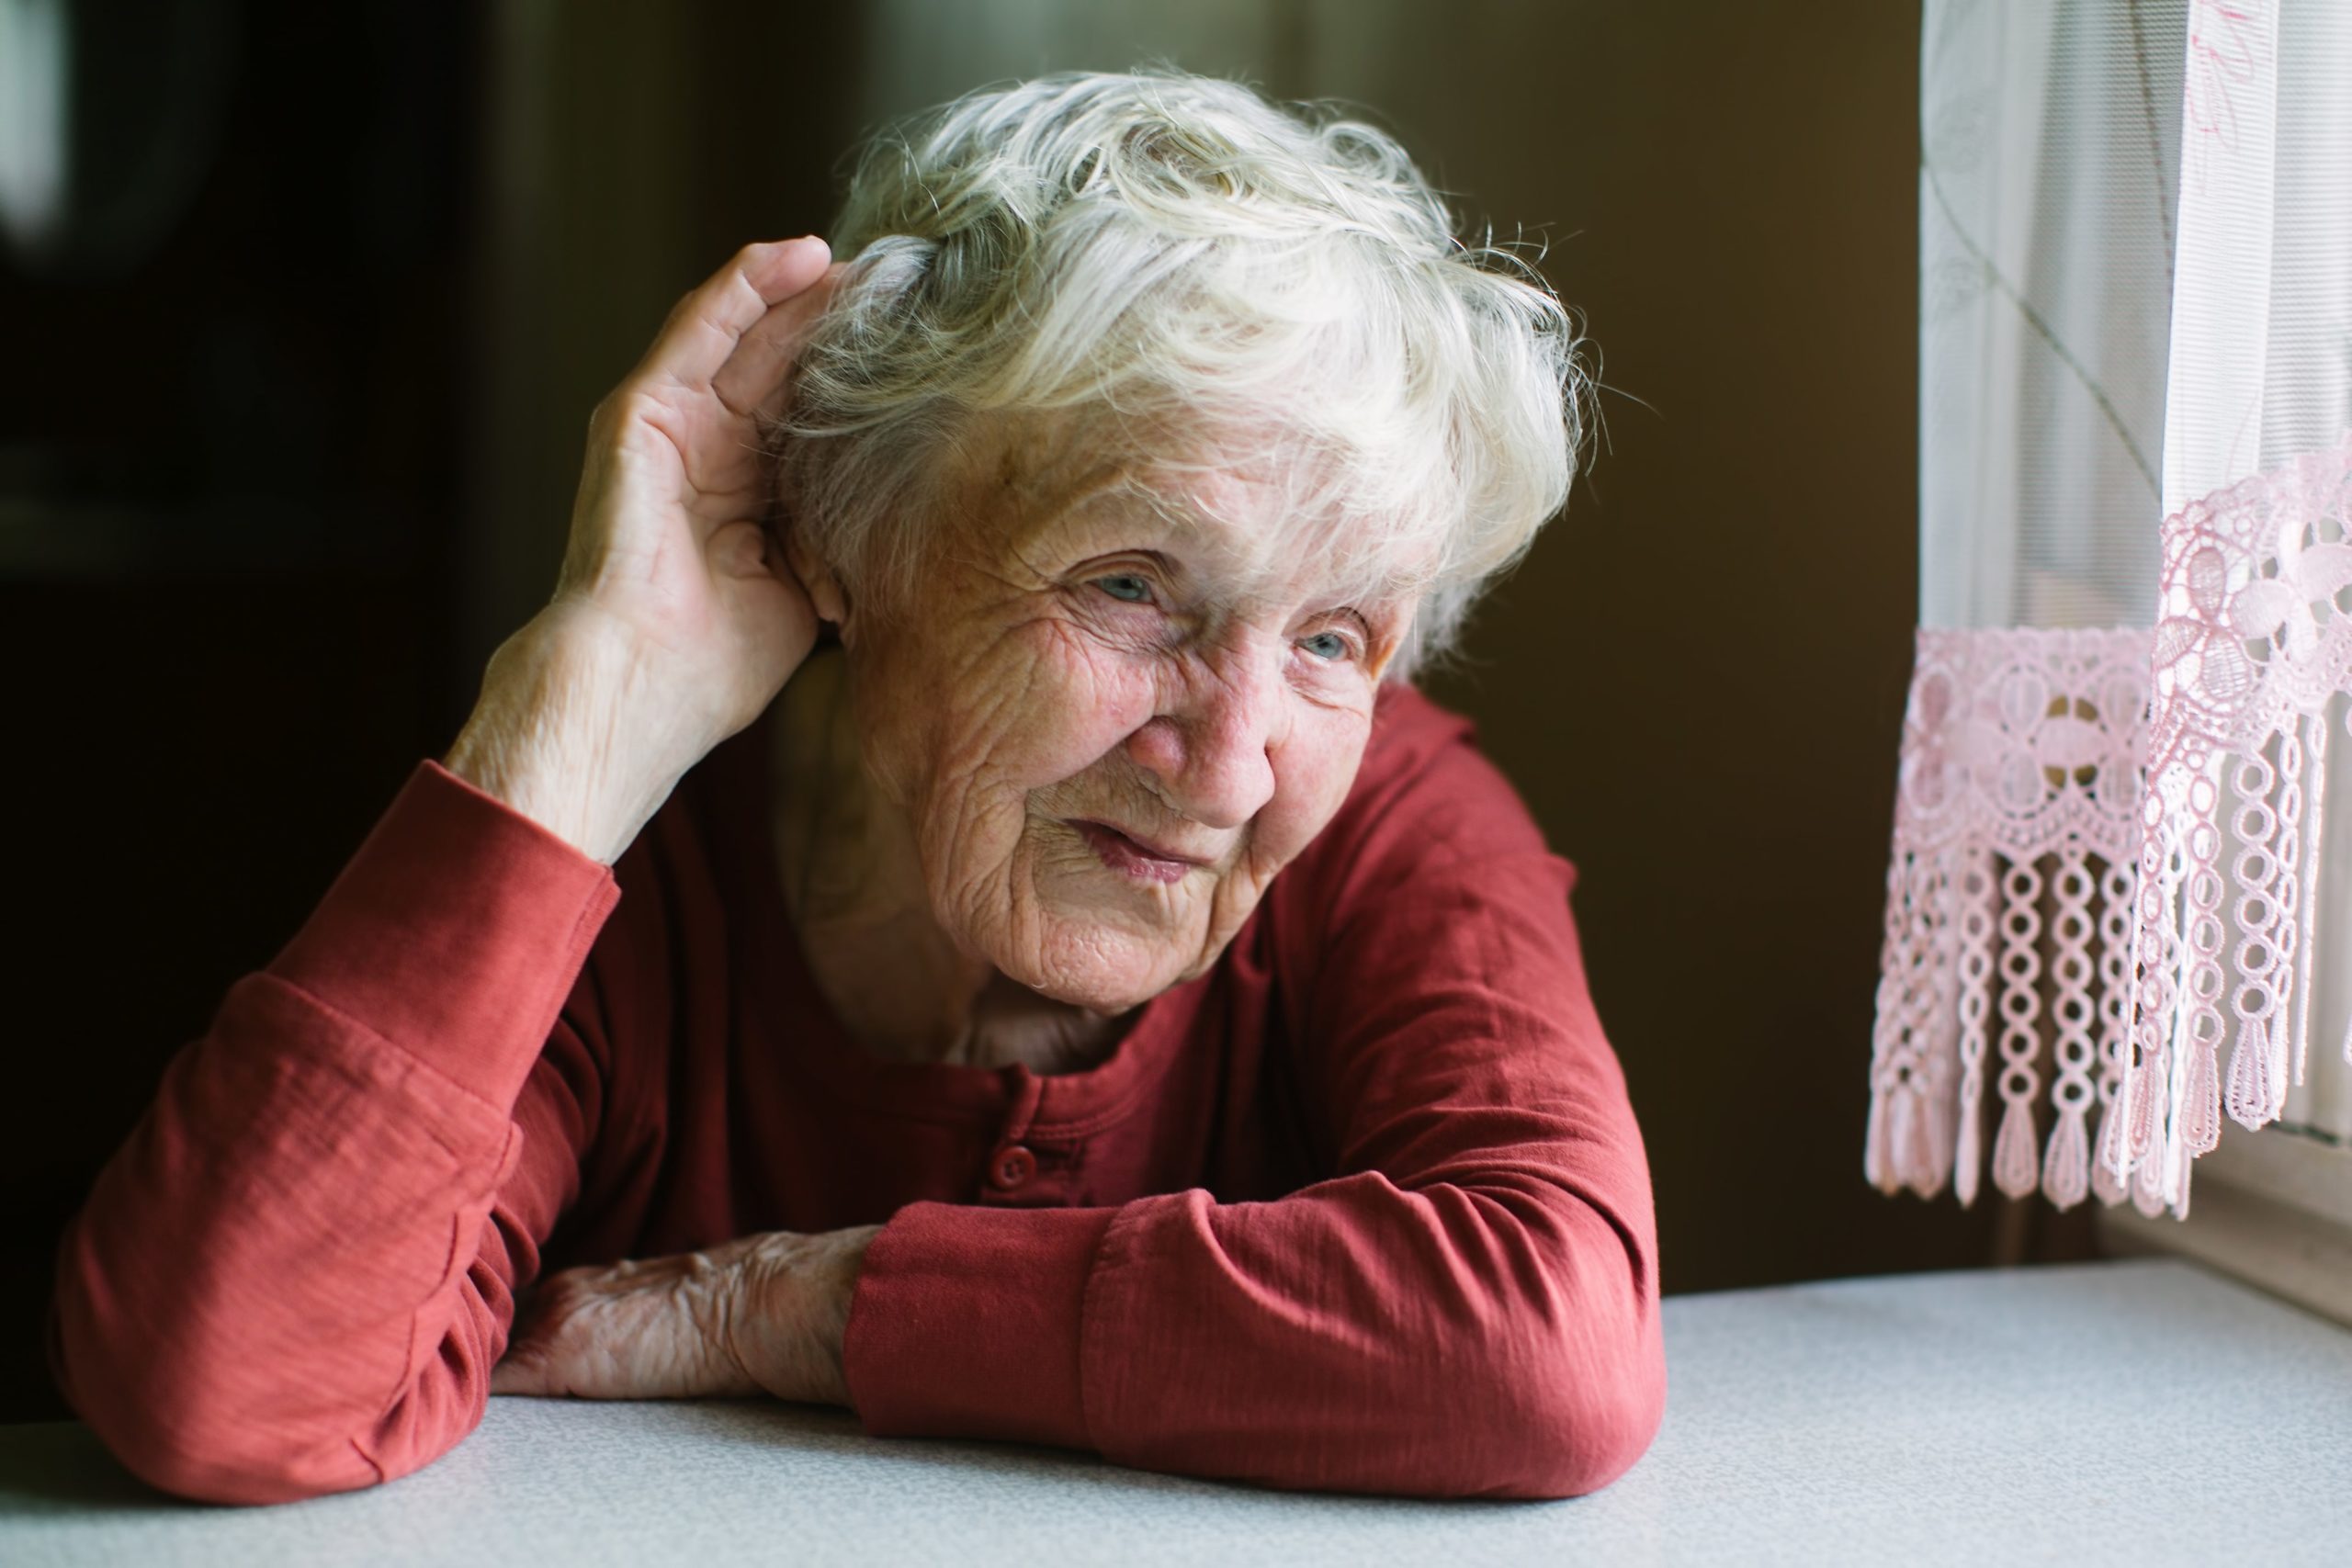 Elderly woman suffering with hearing loss